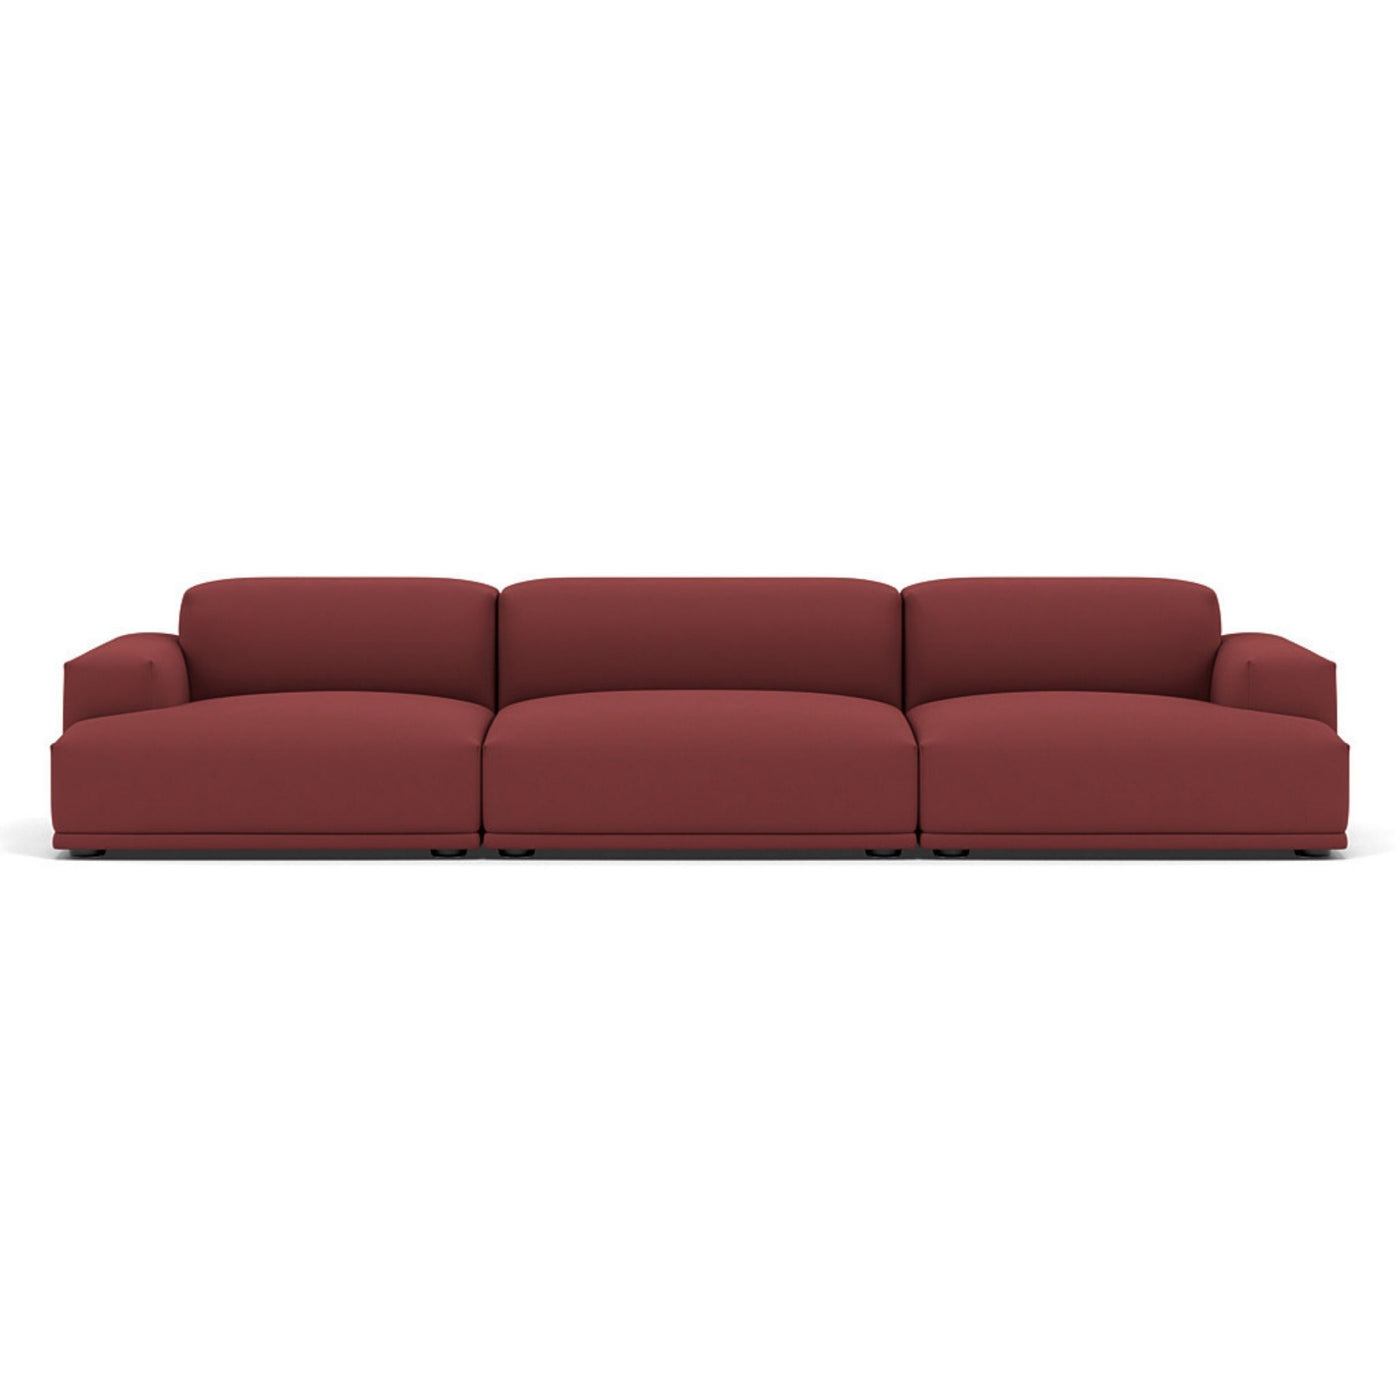 Muuto Connect modular sofa 3 seater in red fabric. Made to order from someday designs. #colour_rime-591